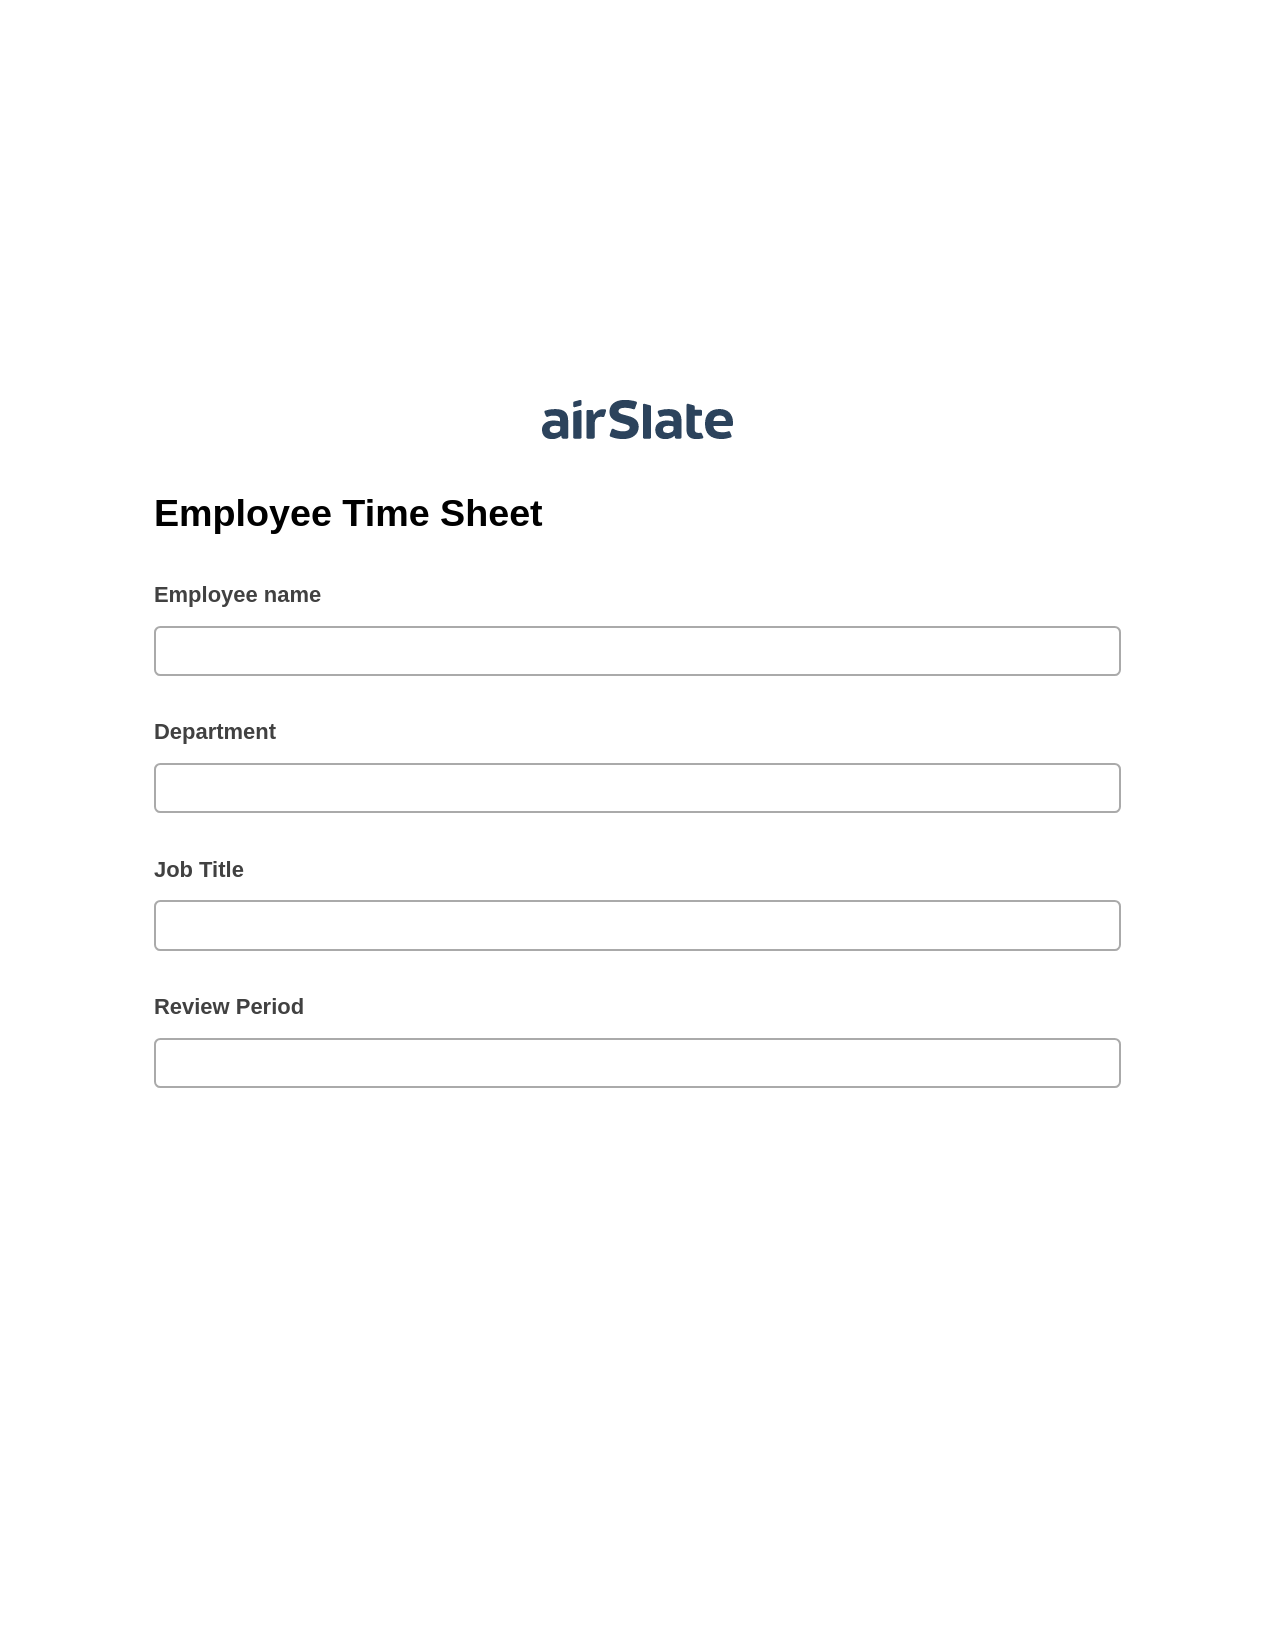 Employee Time Sheet Pre-fill Dropdowns from Airtable, Create MS Dynamics 365 Records Bot, Post-finish Document Bot